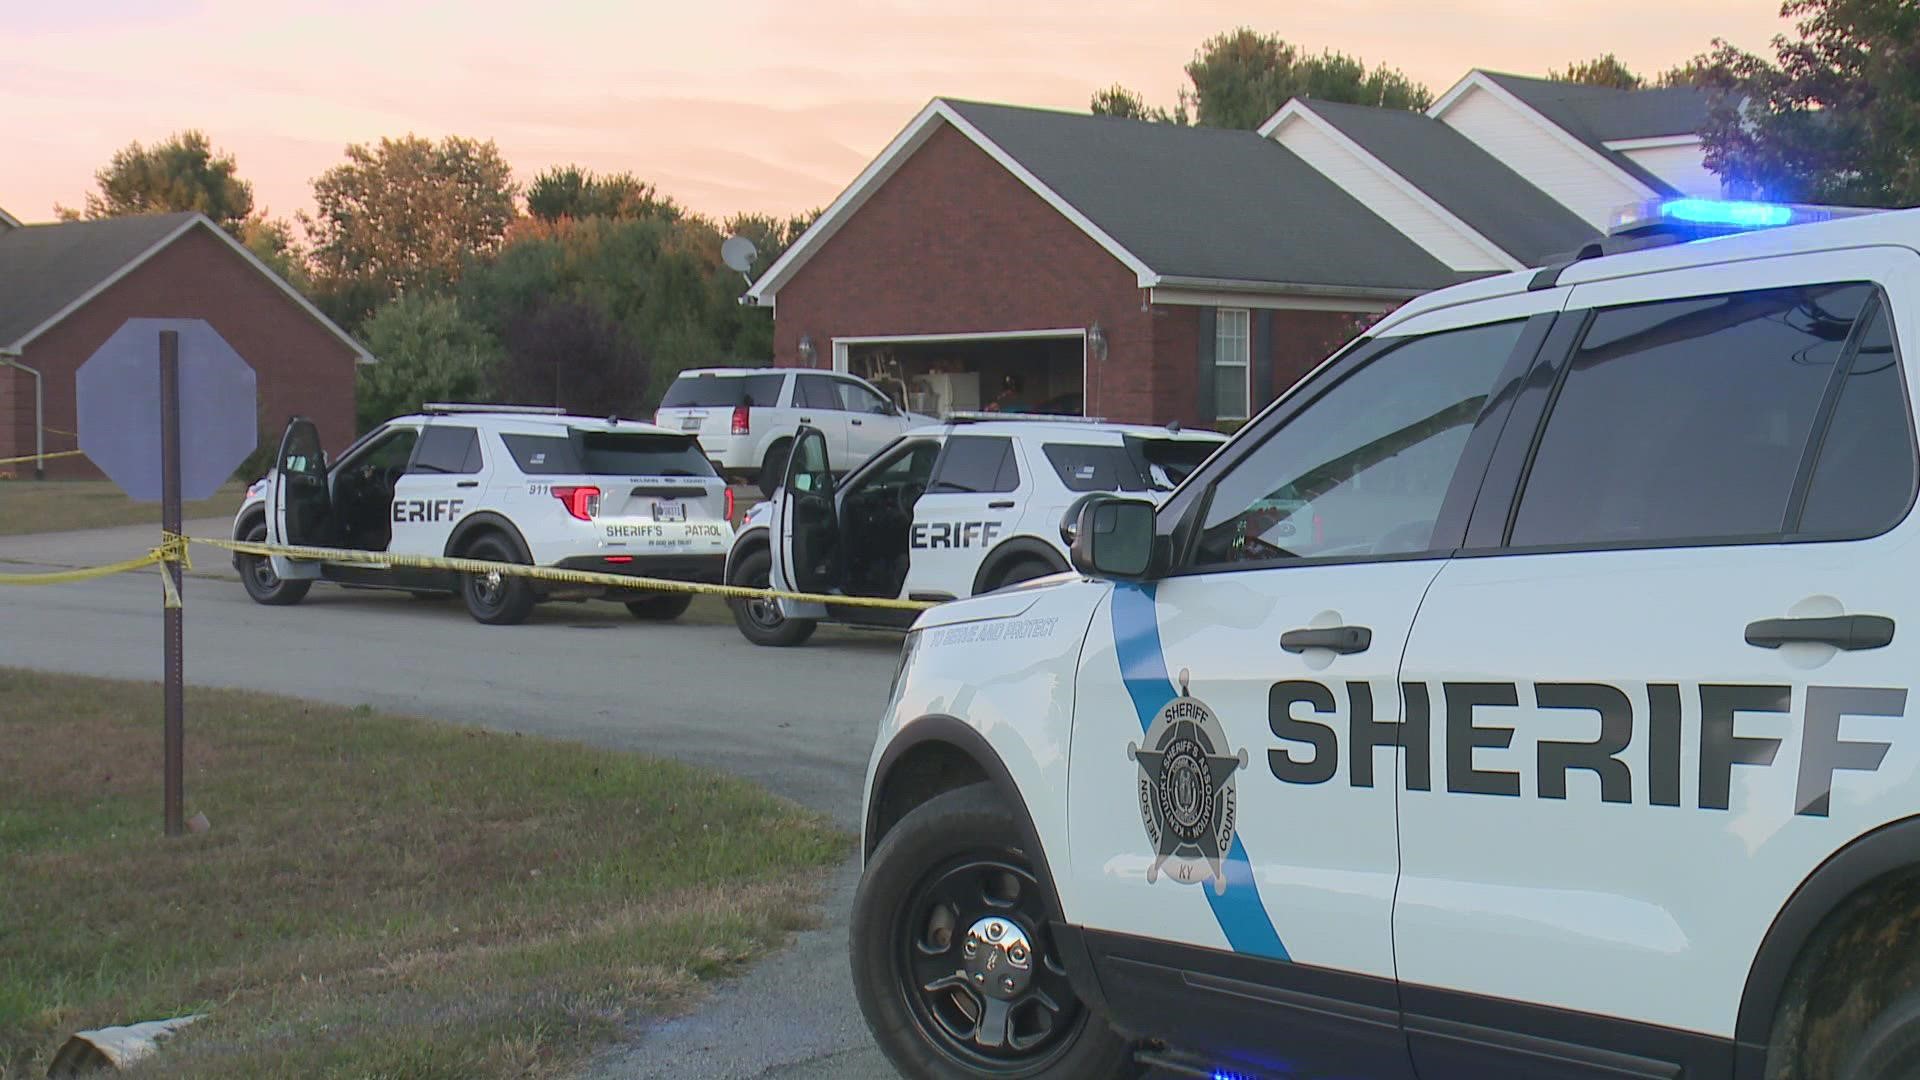 A domestic situation led to a man's arrest and him facing multiple charges including attempted murder after he shot a sheriff's deputy on Friday in Bardstown.